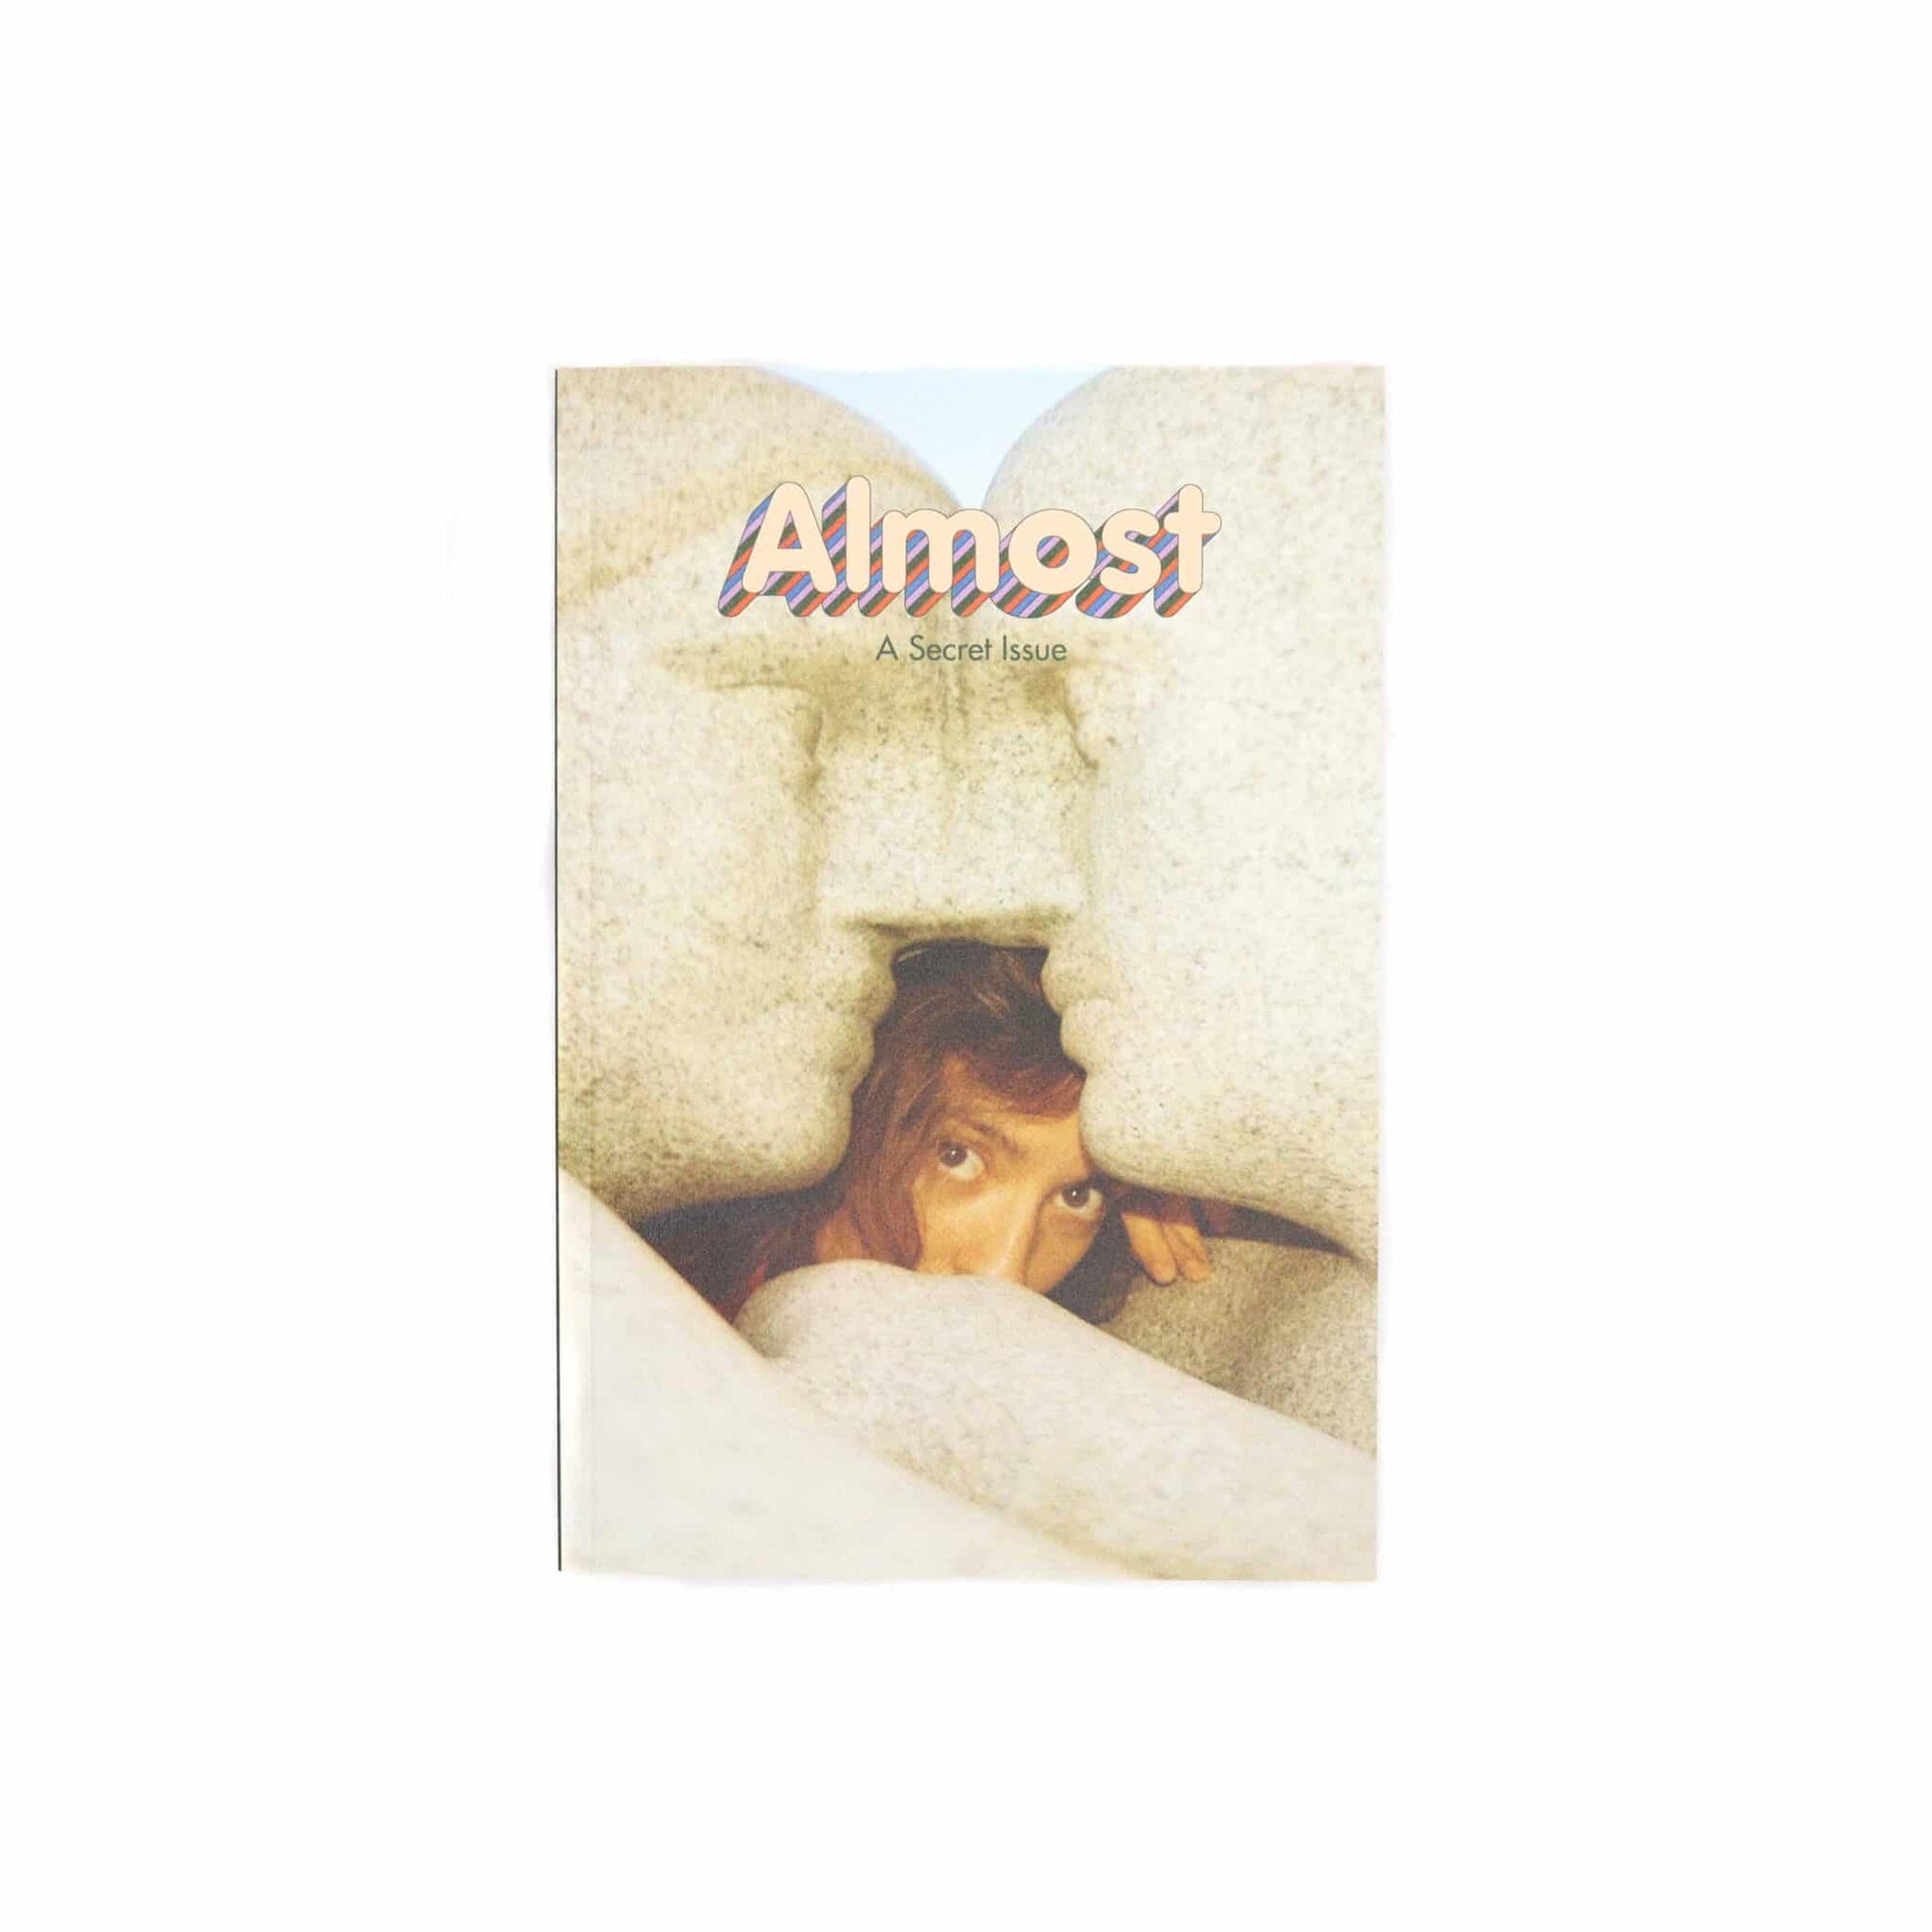 Almost Magazine – A Secret Issue